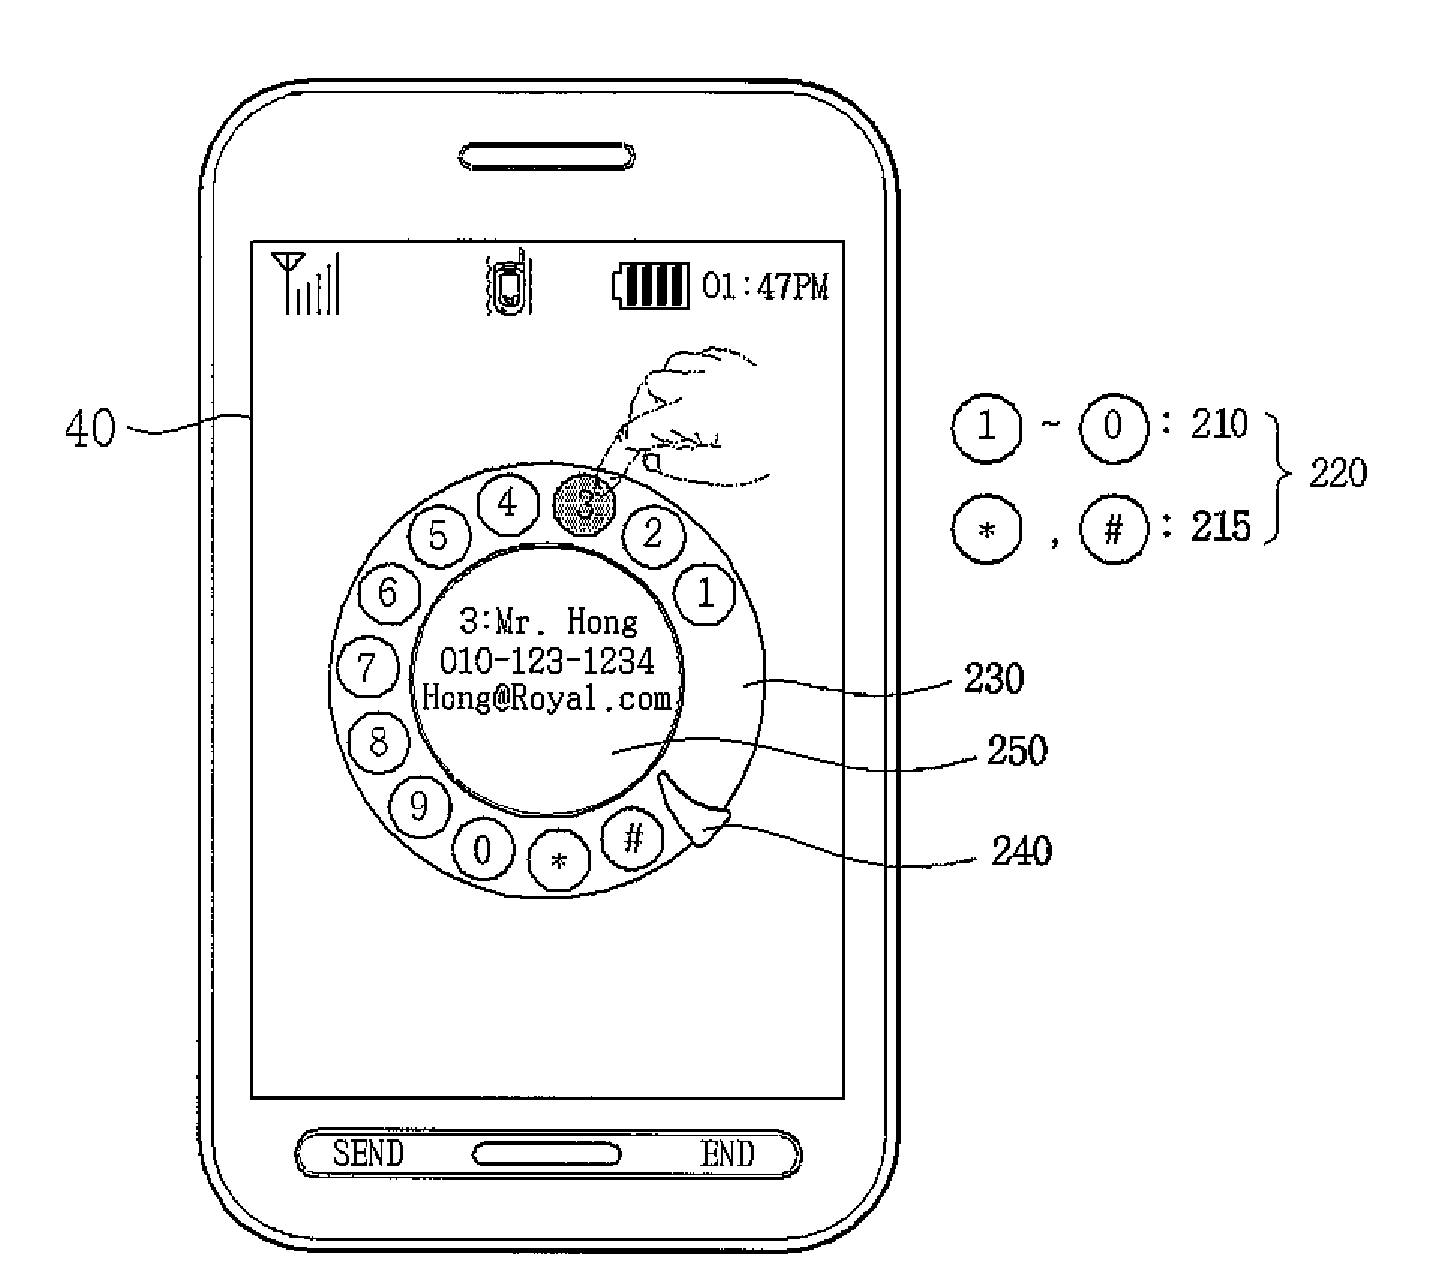 Executing functions through touch input device